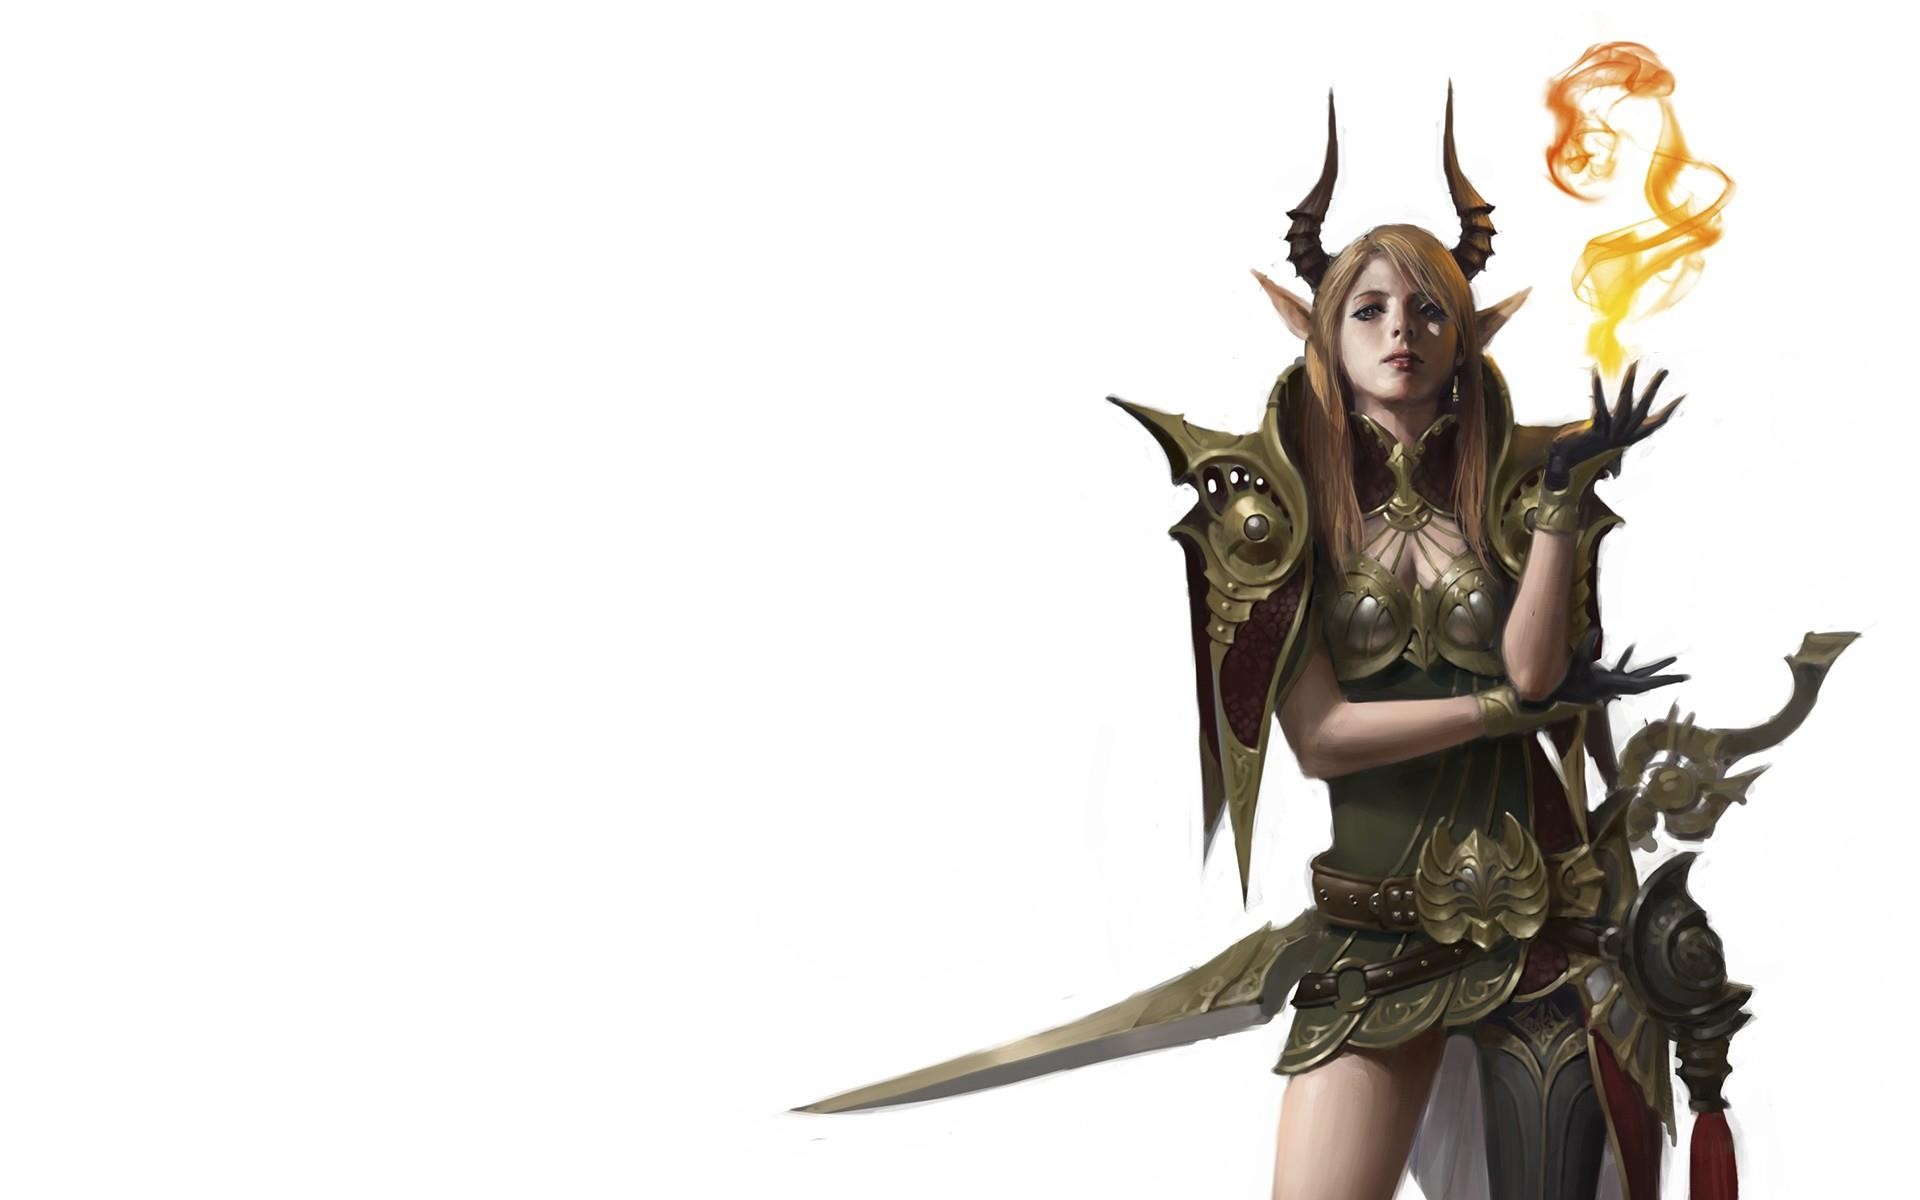 General 1920x1200 elves horns armor sword figure-hugging armor frontal view cleavage fantasy girl pointy ears simple background white background fantasy armor standing women